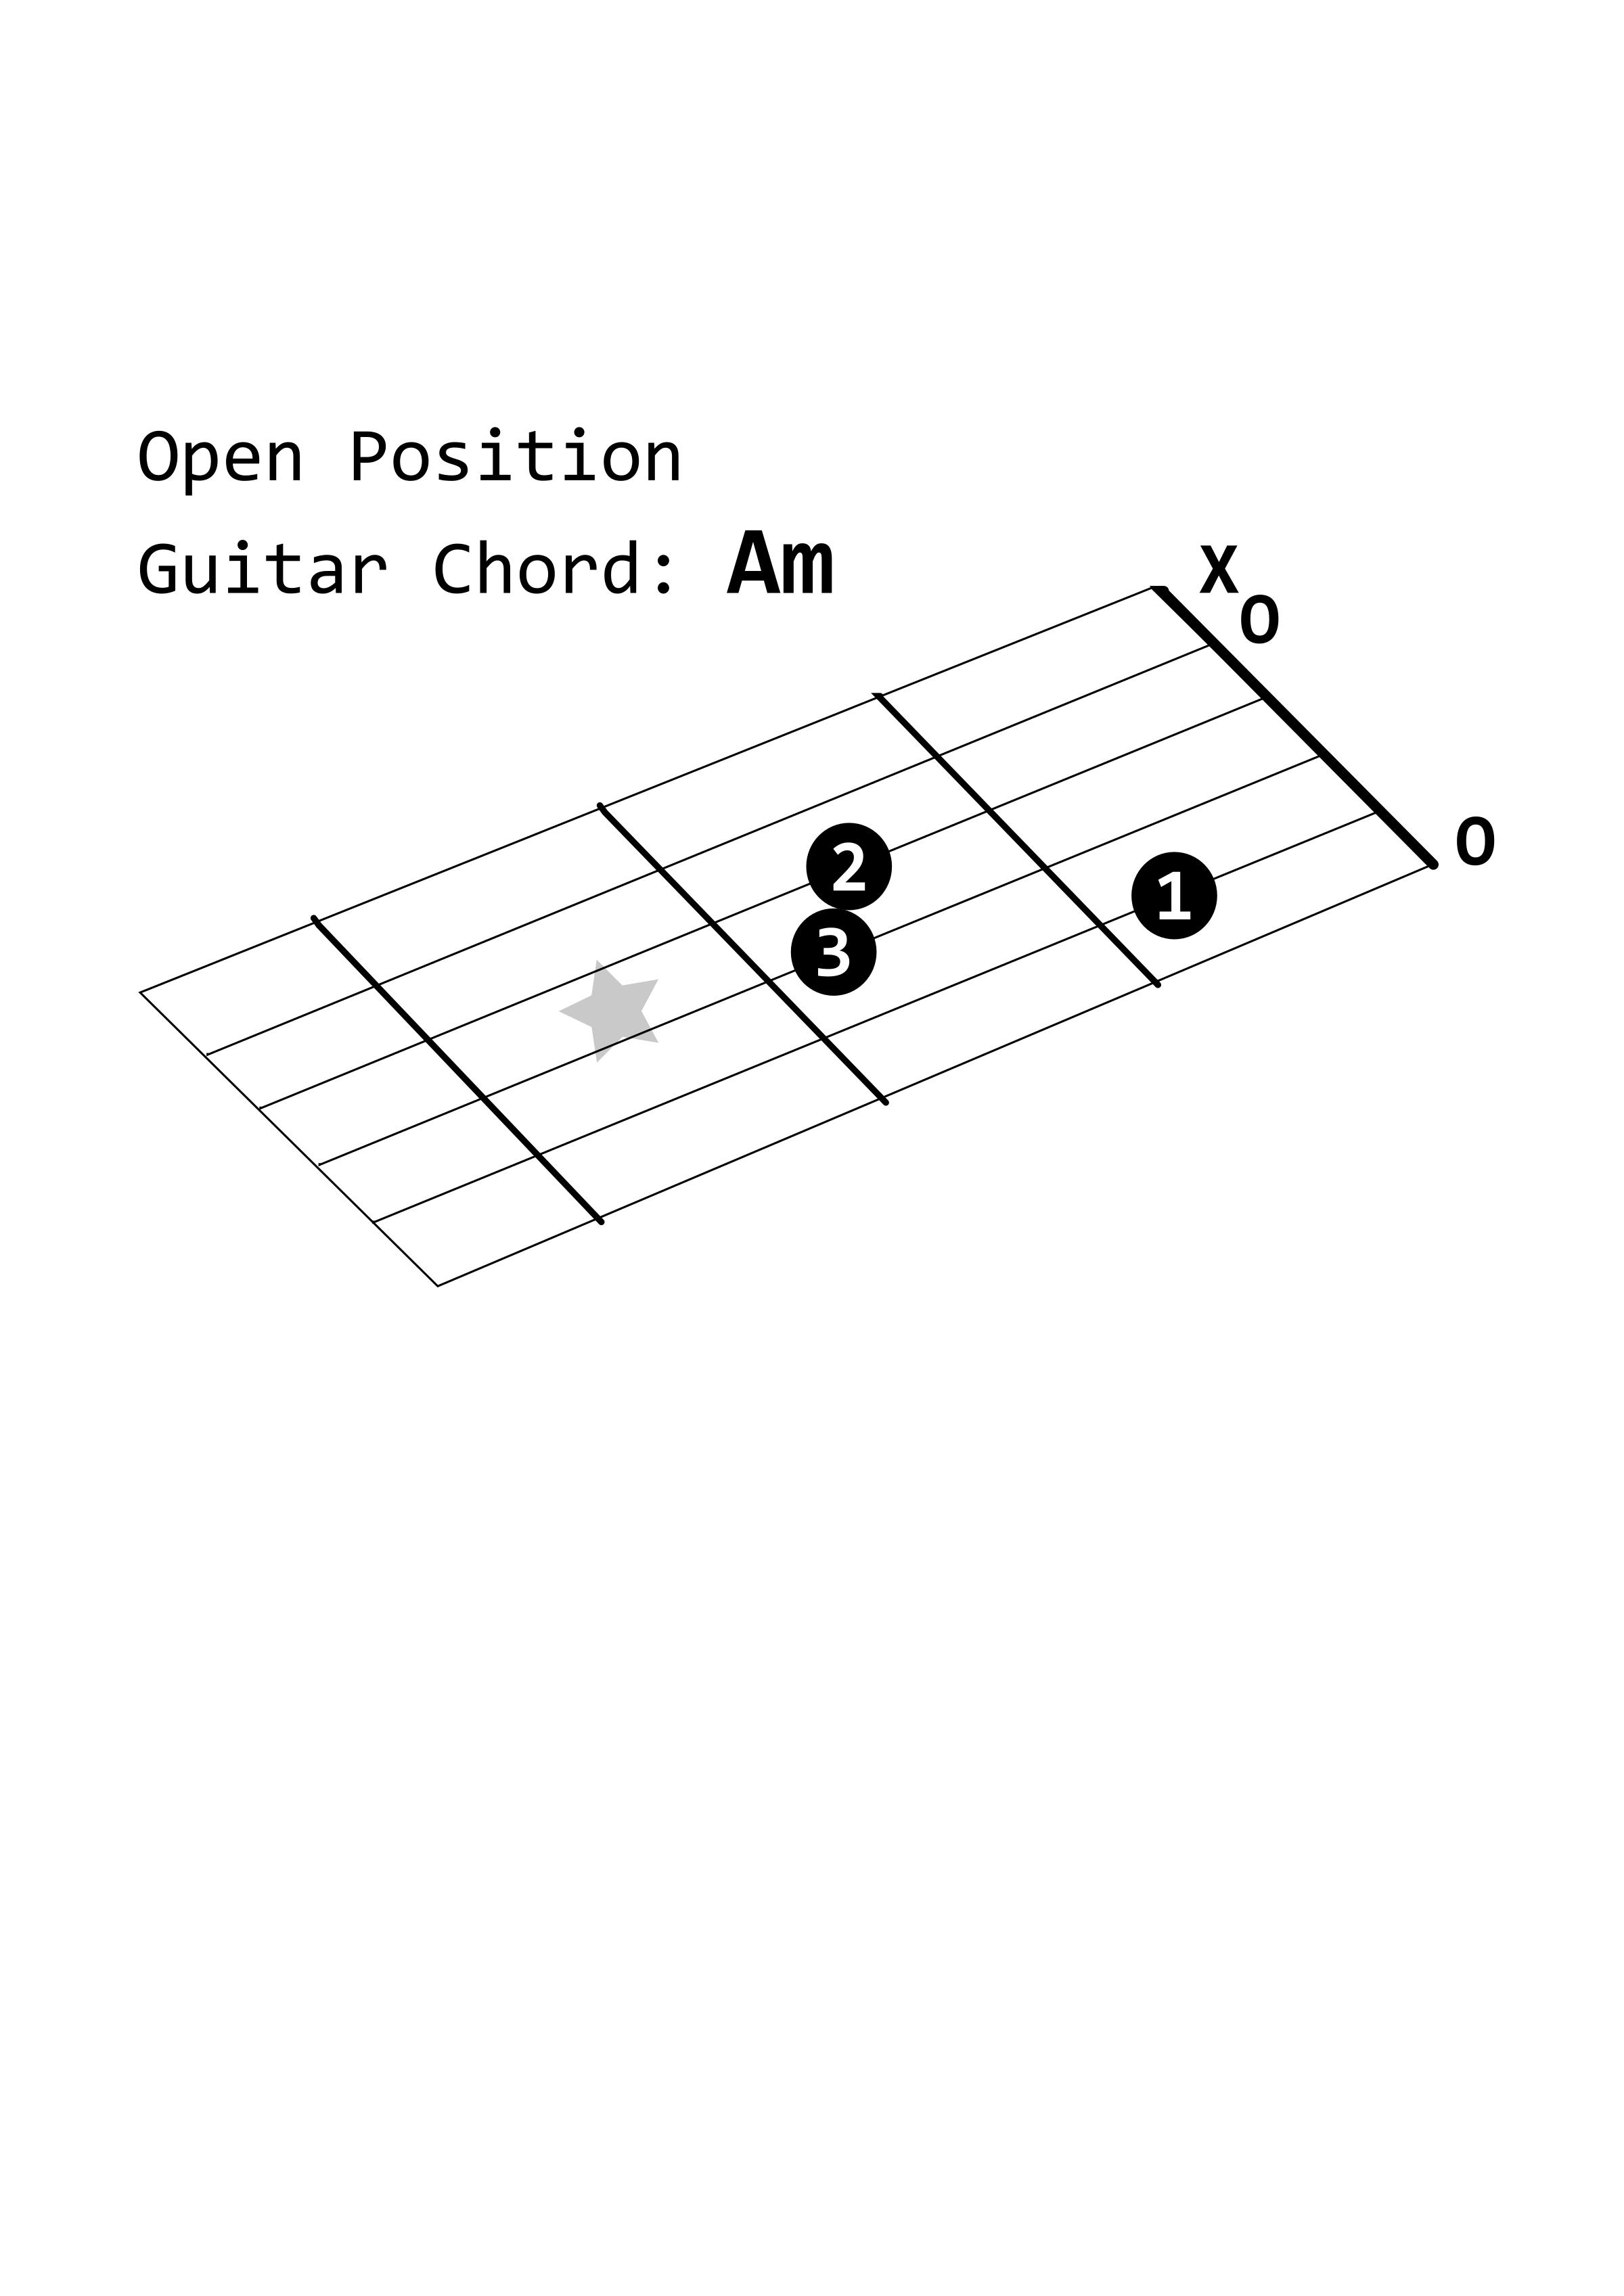 Open Position Guitar Chord: Am icons